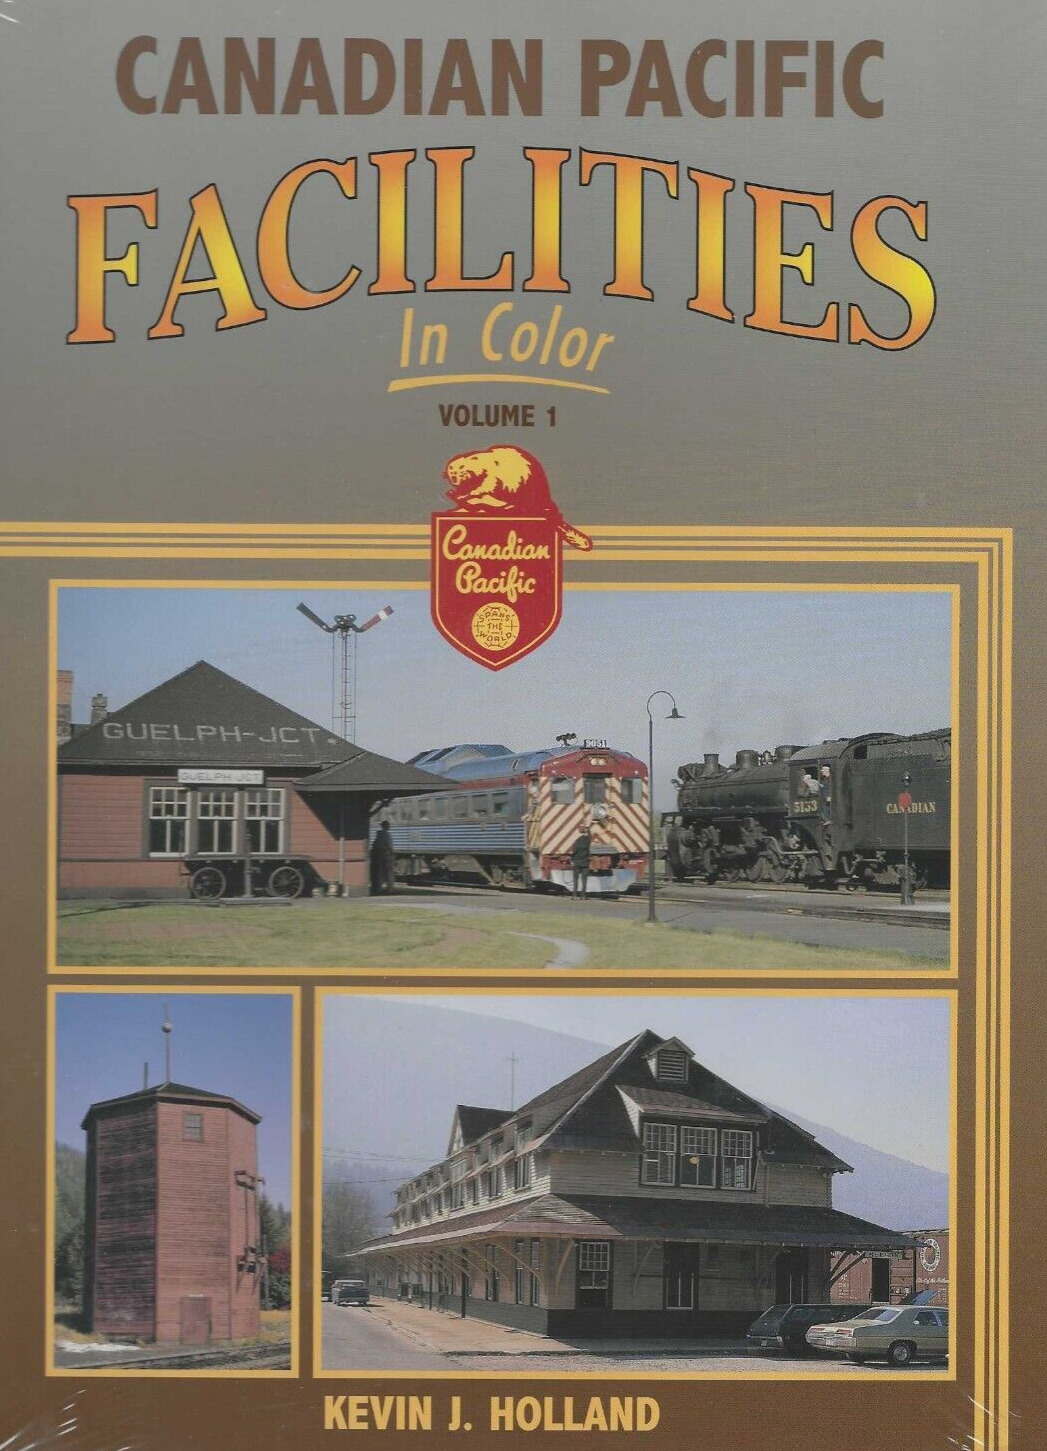 CANADIAN PACIFIC FACILITIES, Vol. 1 - (BRAND NEW BOOK)